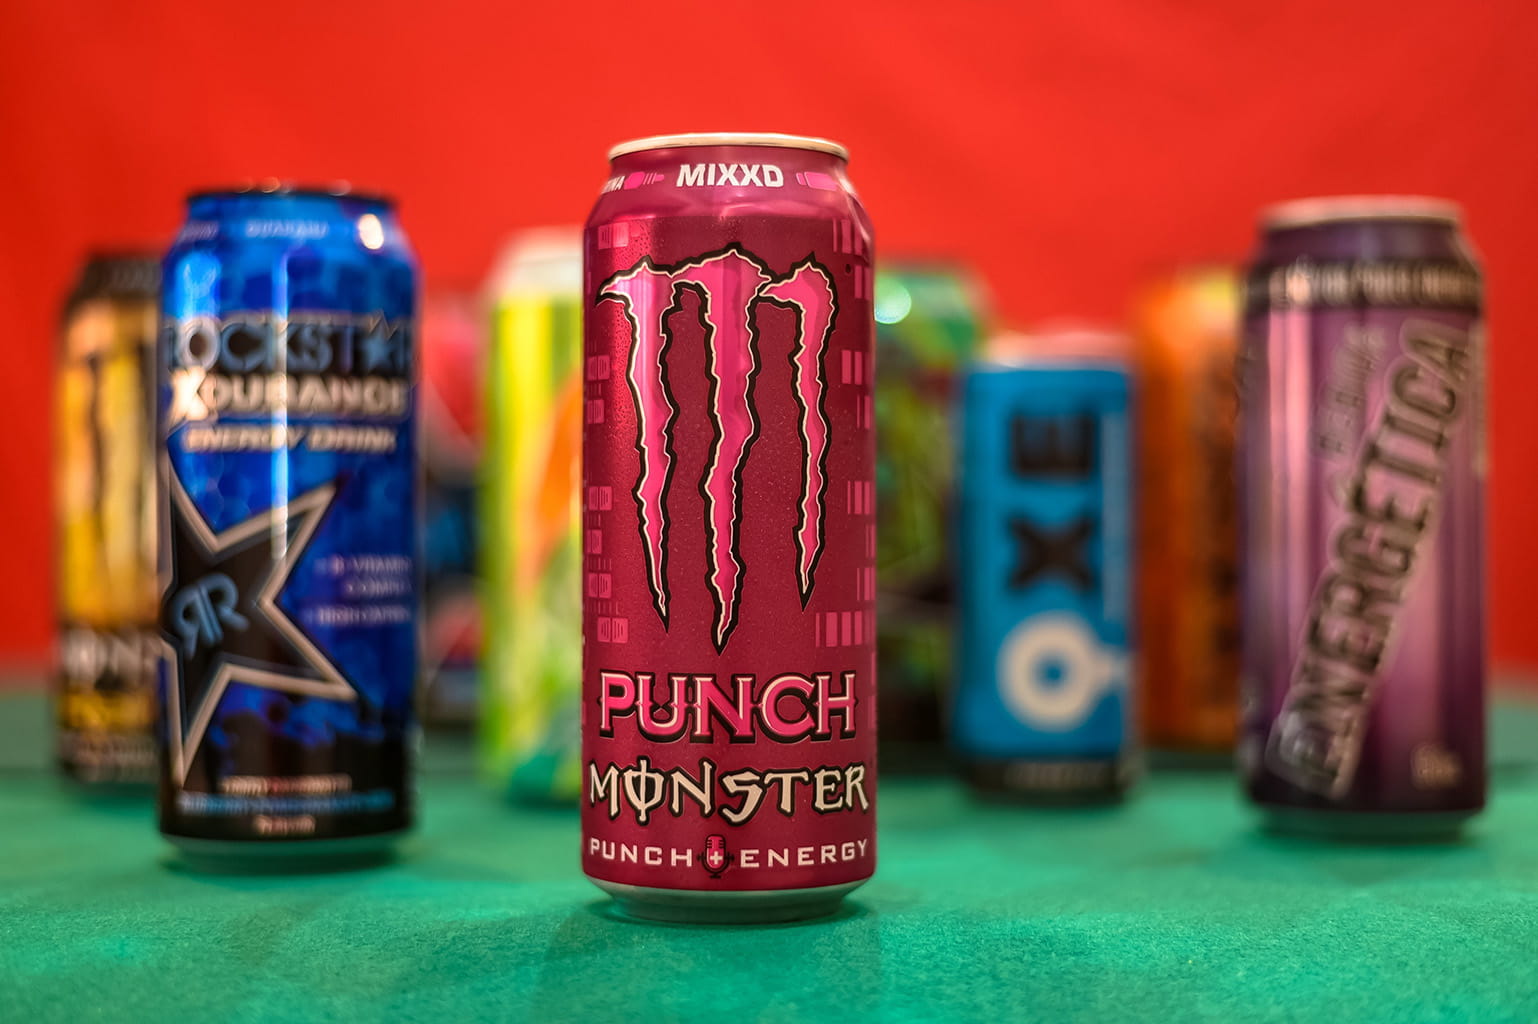 Energy drinks may do more harm than good, researchers say, MUSC